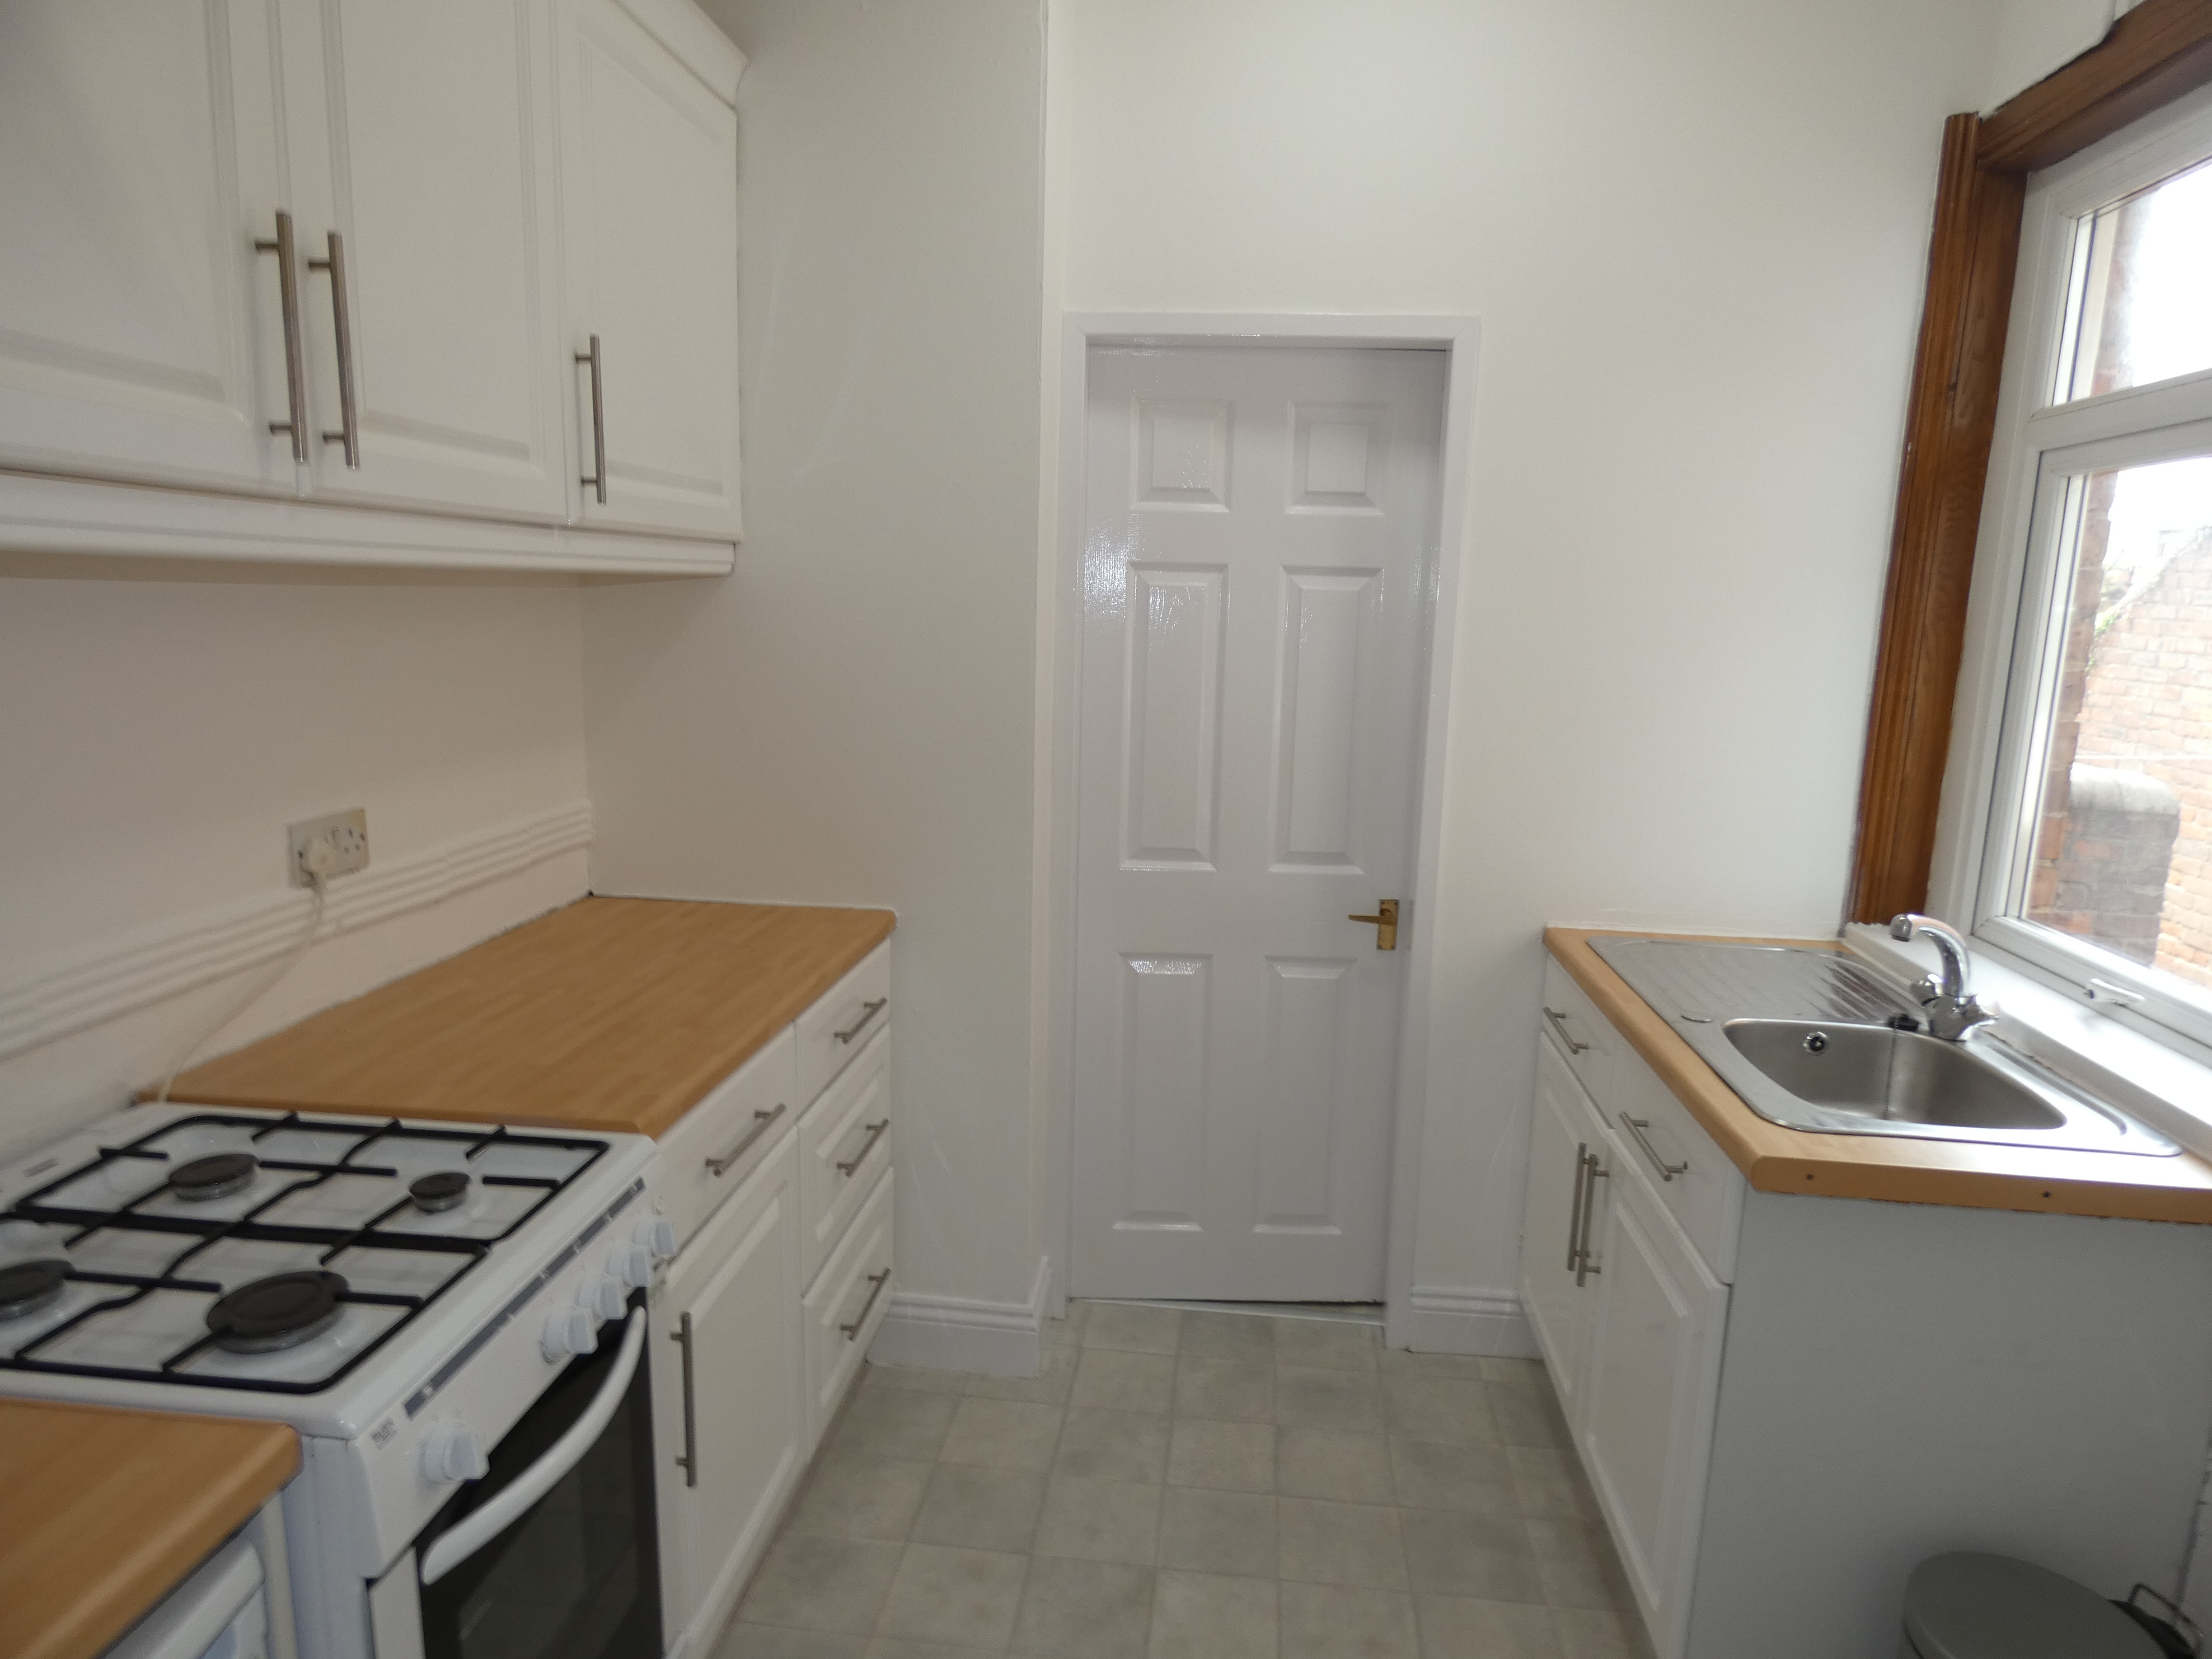 2 bed flat to rent in Cartington Terrace, Newcastle upon tyne  - Property Image 1